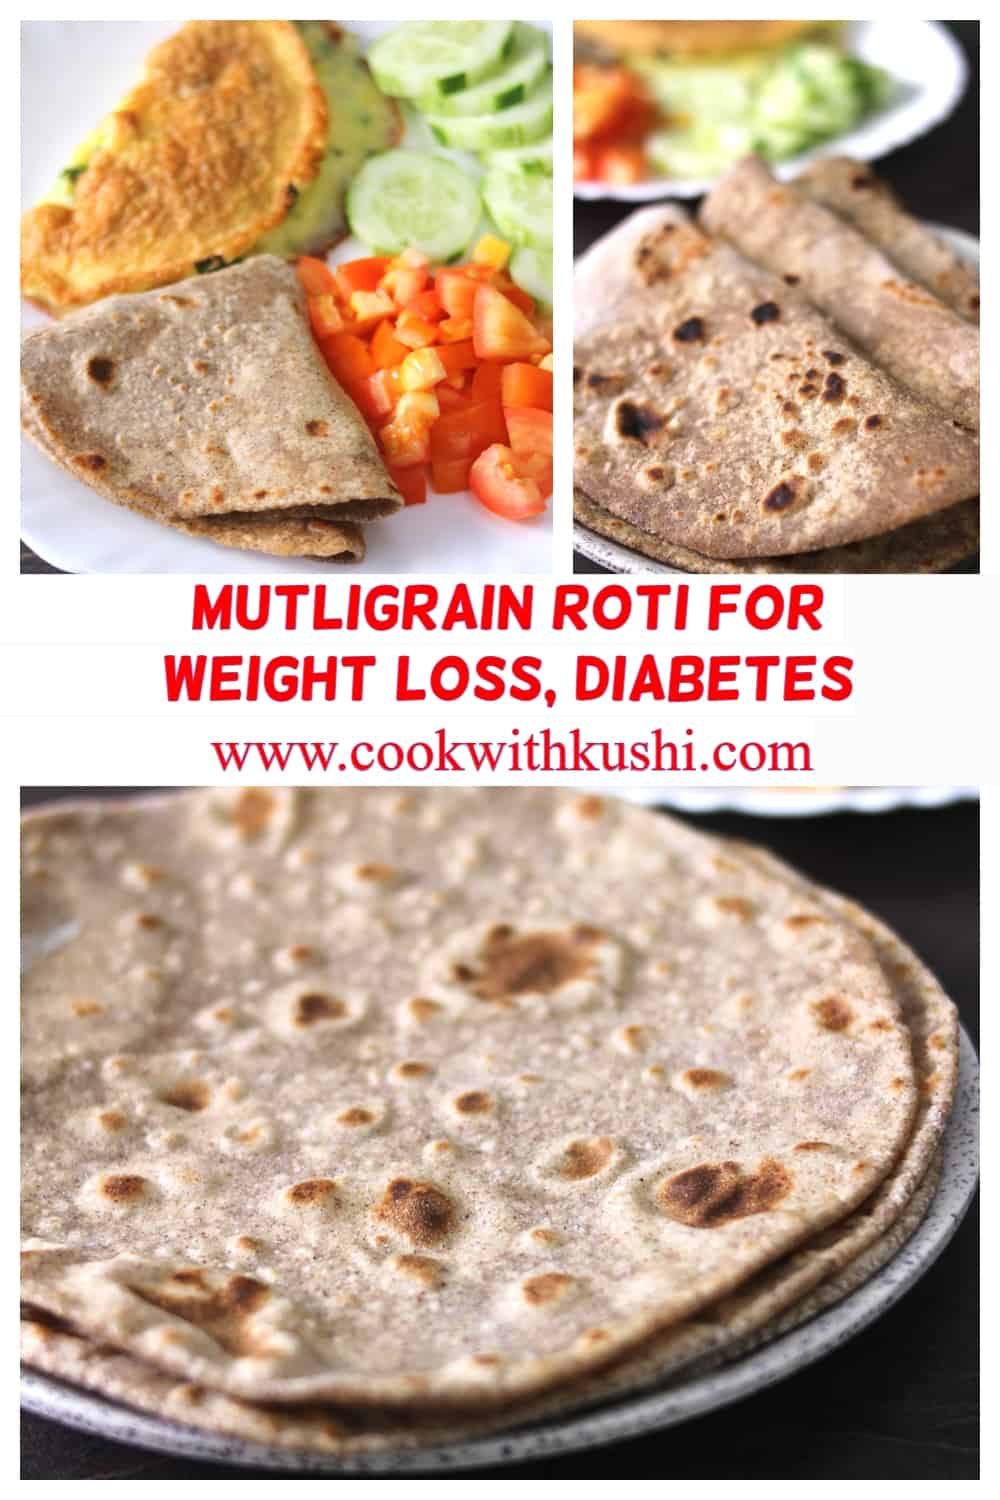 images showing healthy weight loss and diabetic friendly multigrain roti (chapati, flatbread)